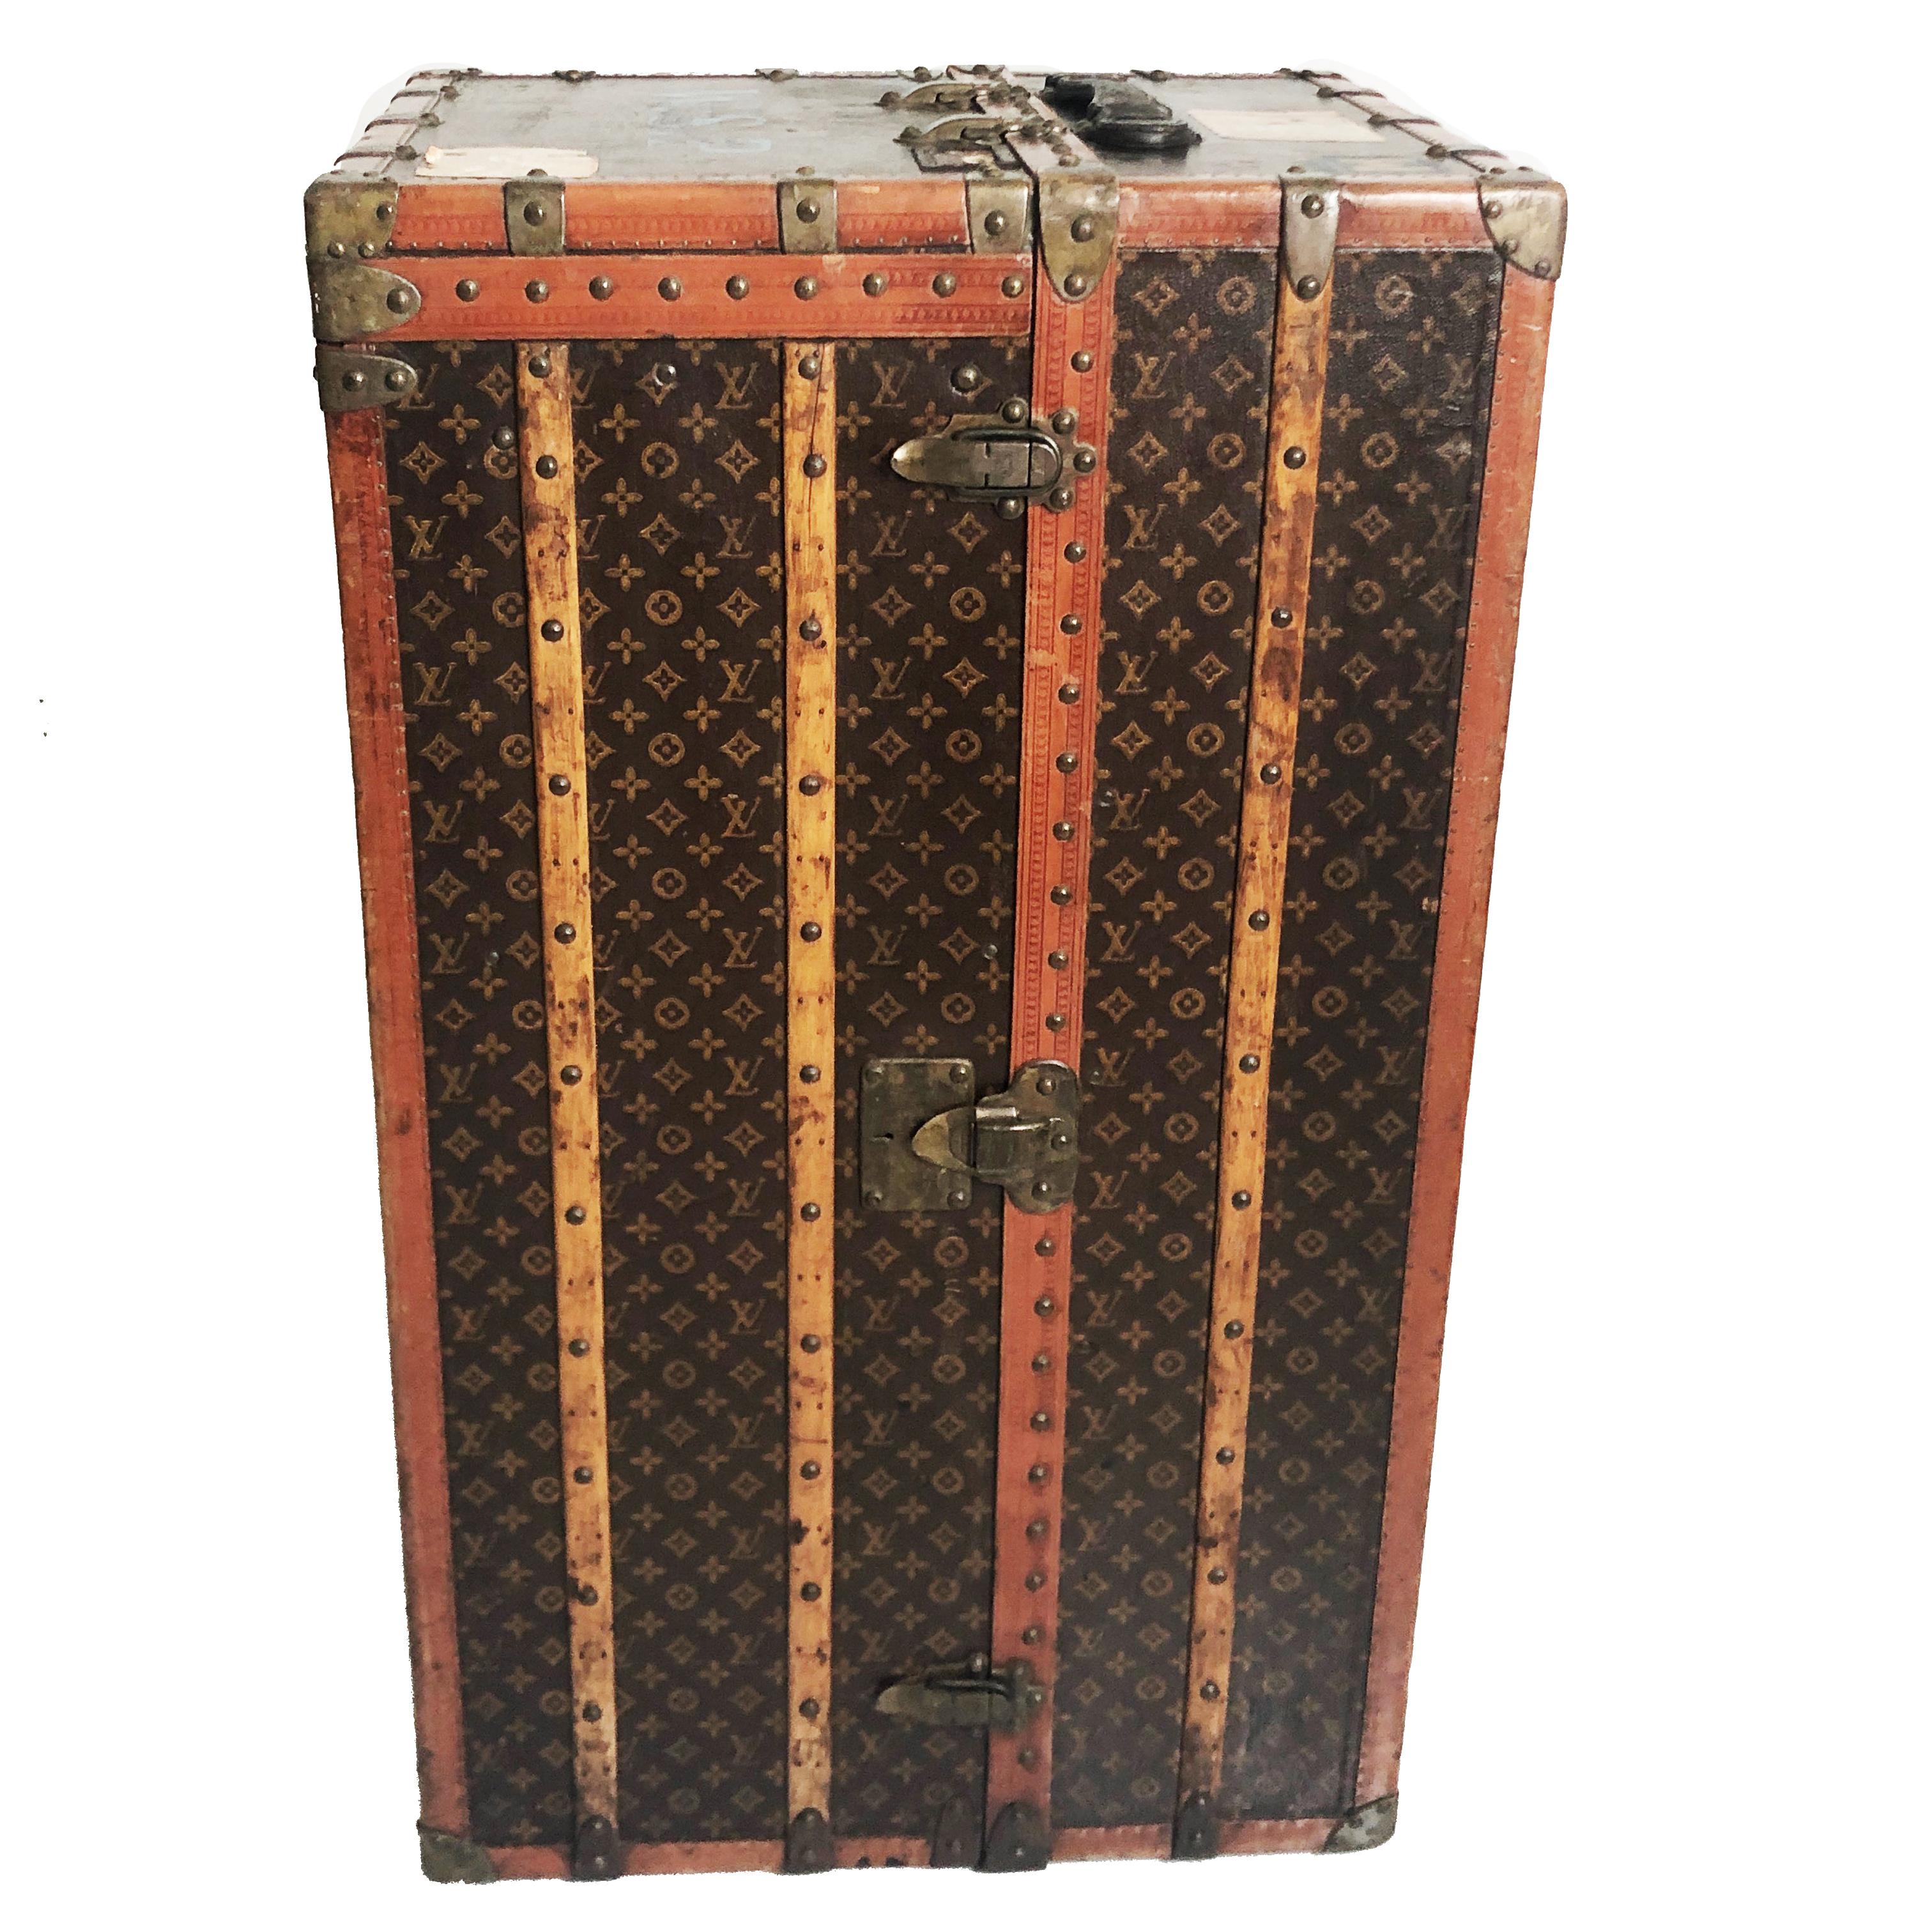 Louis Vuitton Large Wardrobe Steamer Trunk Monogram Travel Case Early 20th C  In Good Condition For Sale In Port Saint Lucie, FL